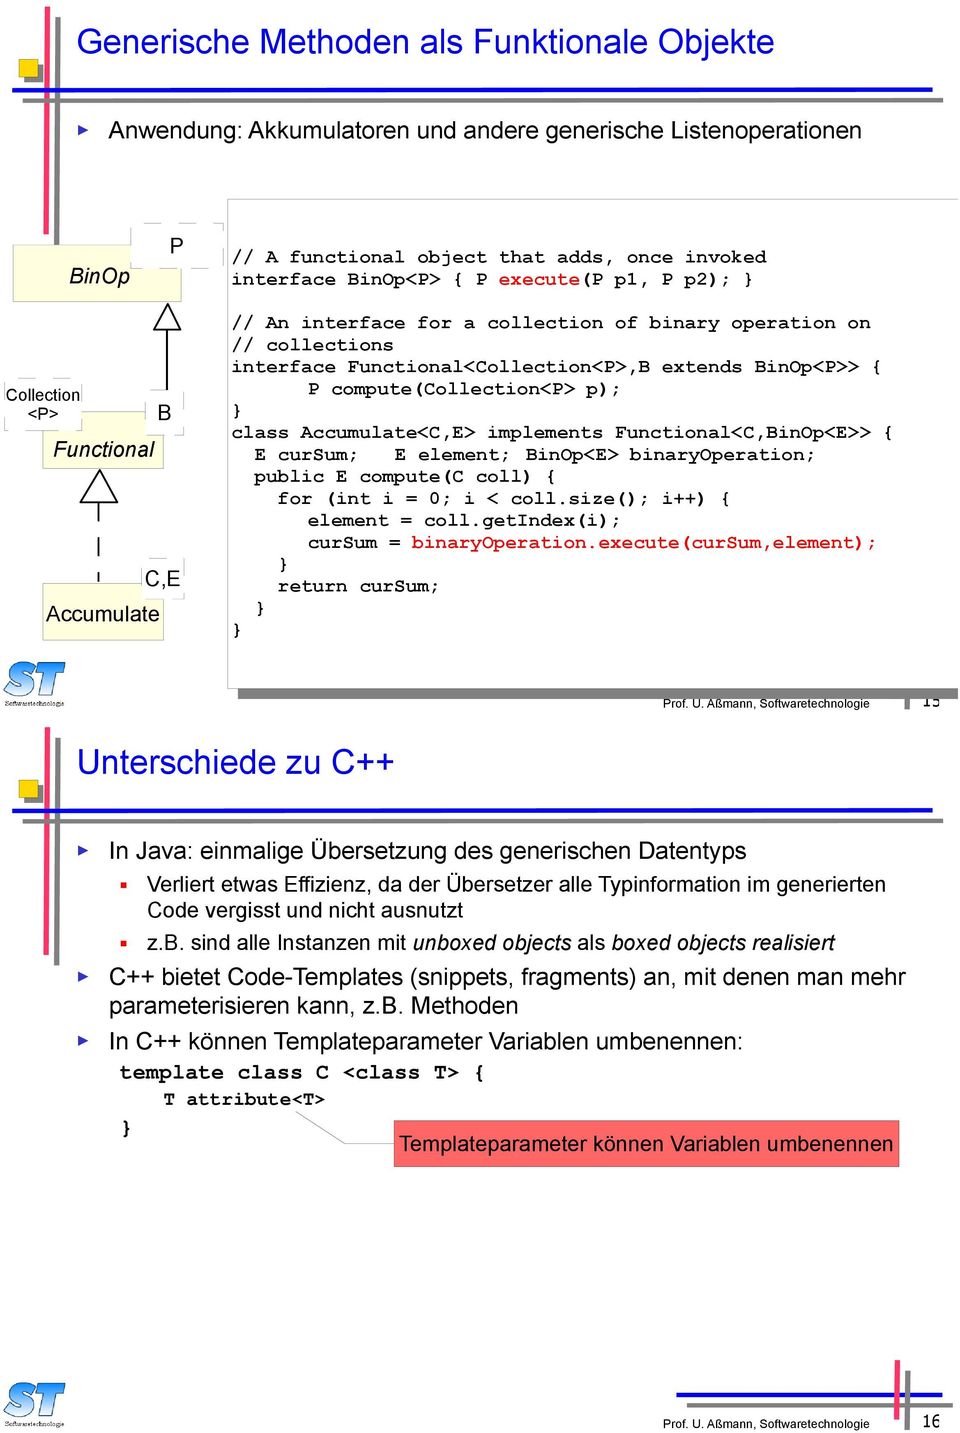 compute(collection<p> p); class Accumulate<C,> implements Functional<C,BinOp<>> { cursum; element; BinOp<> binaryoperation; public compute(c coll) { for (int i = 0; i < coll.